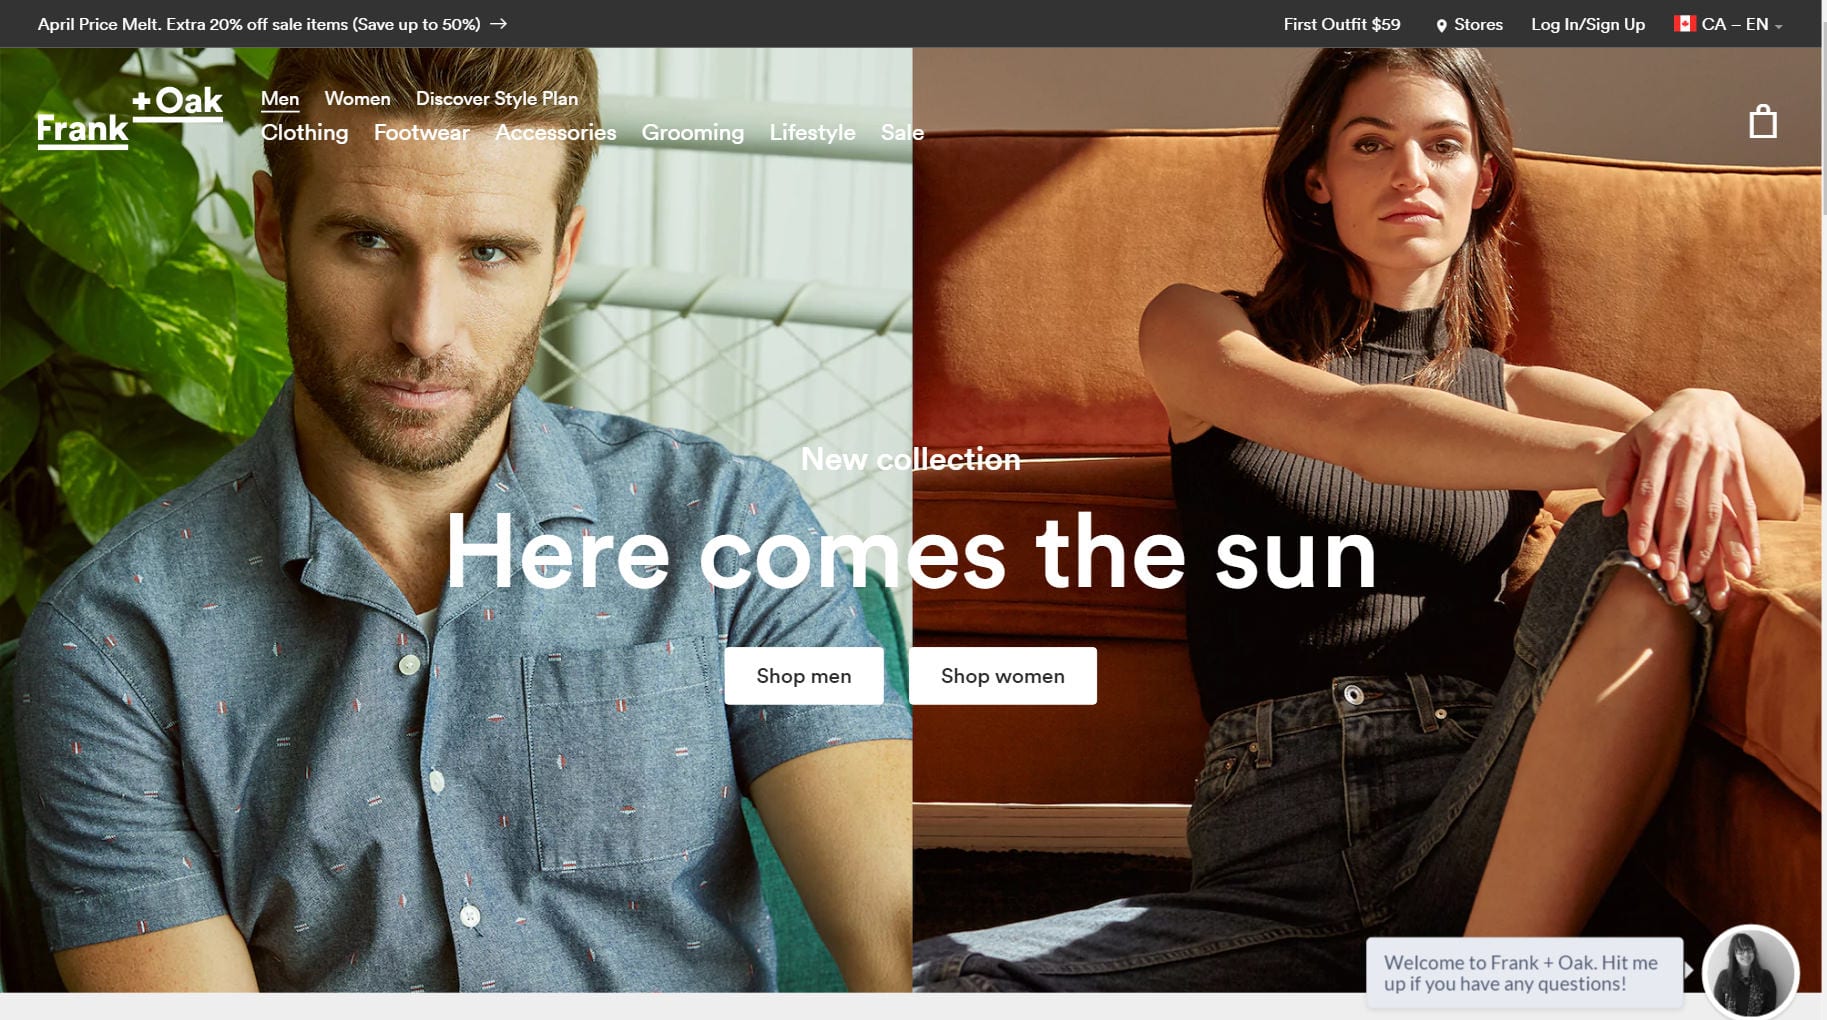 Screen Capture: Frank and oak. New collection, here comes the sun. Shop men, shop women. 